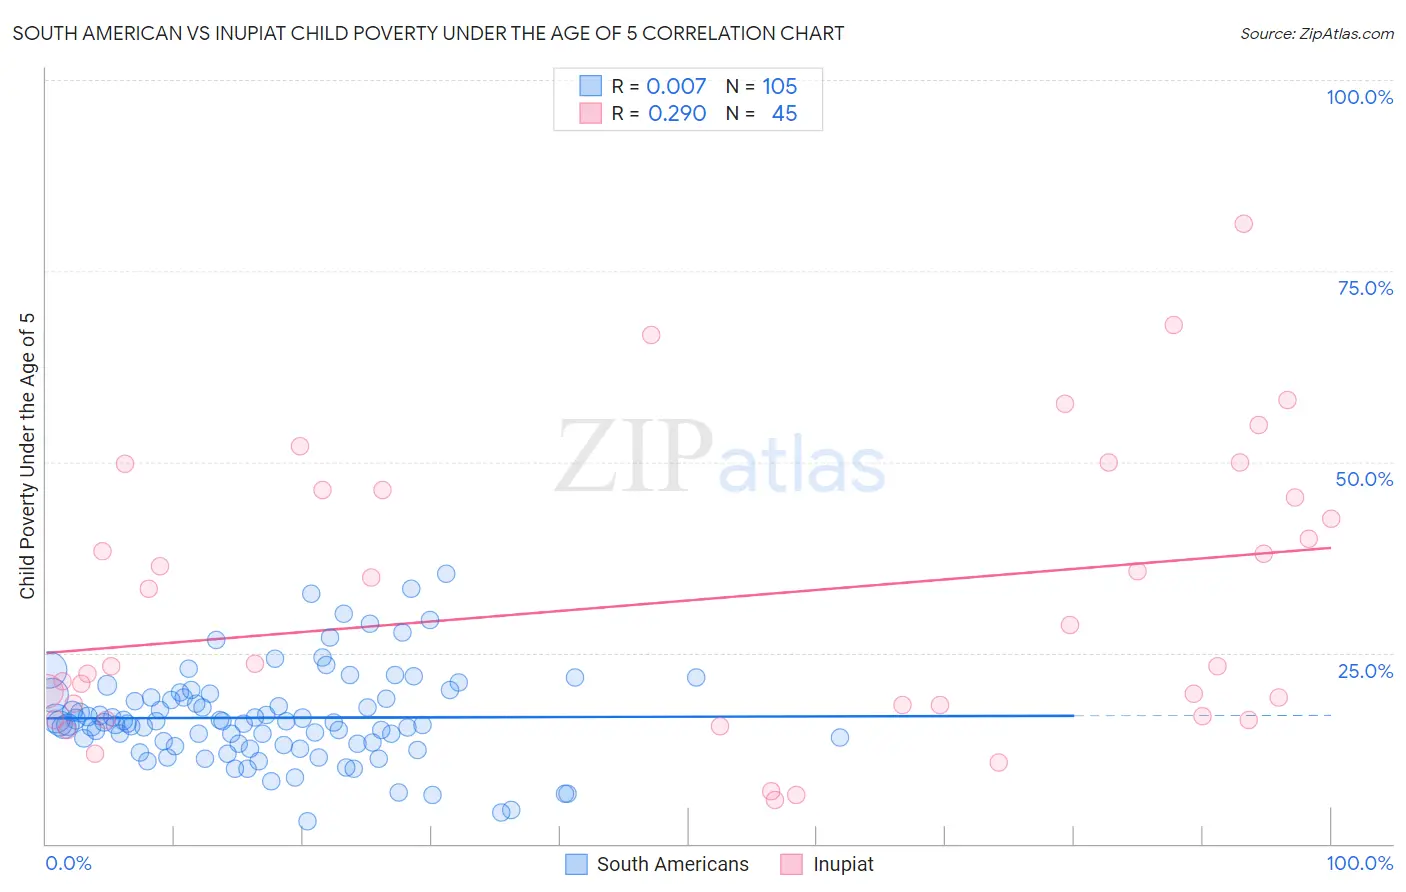 South American vs Inupiat Child Poverty Under the Age of 5